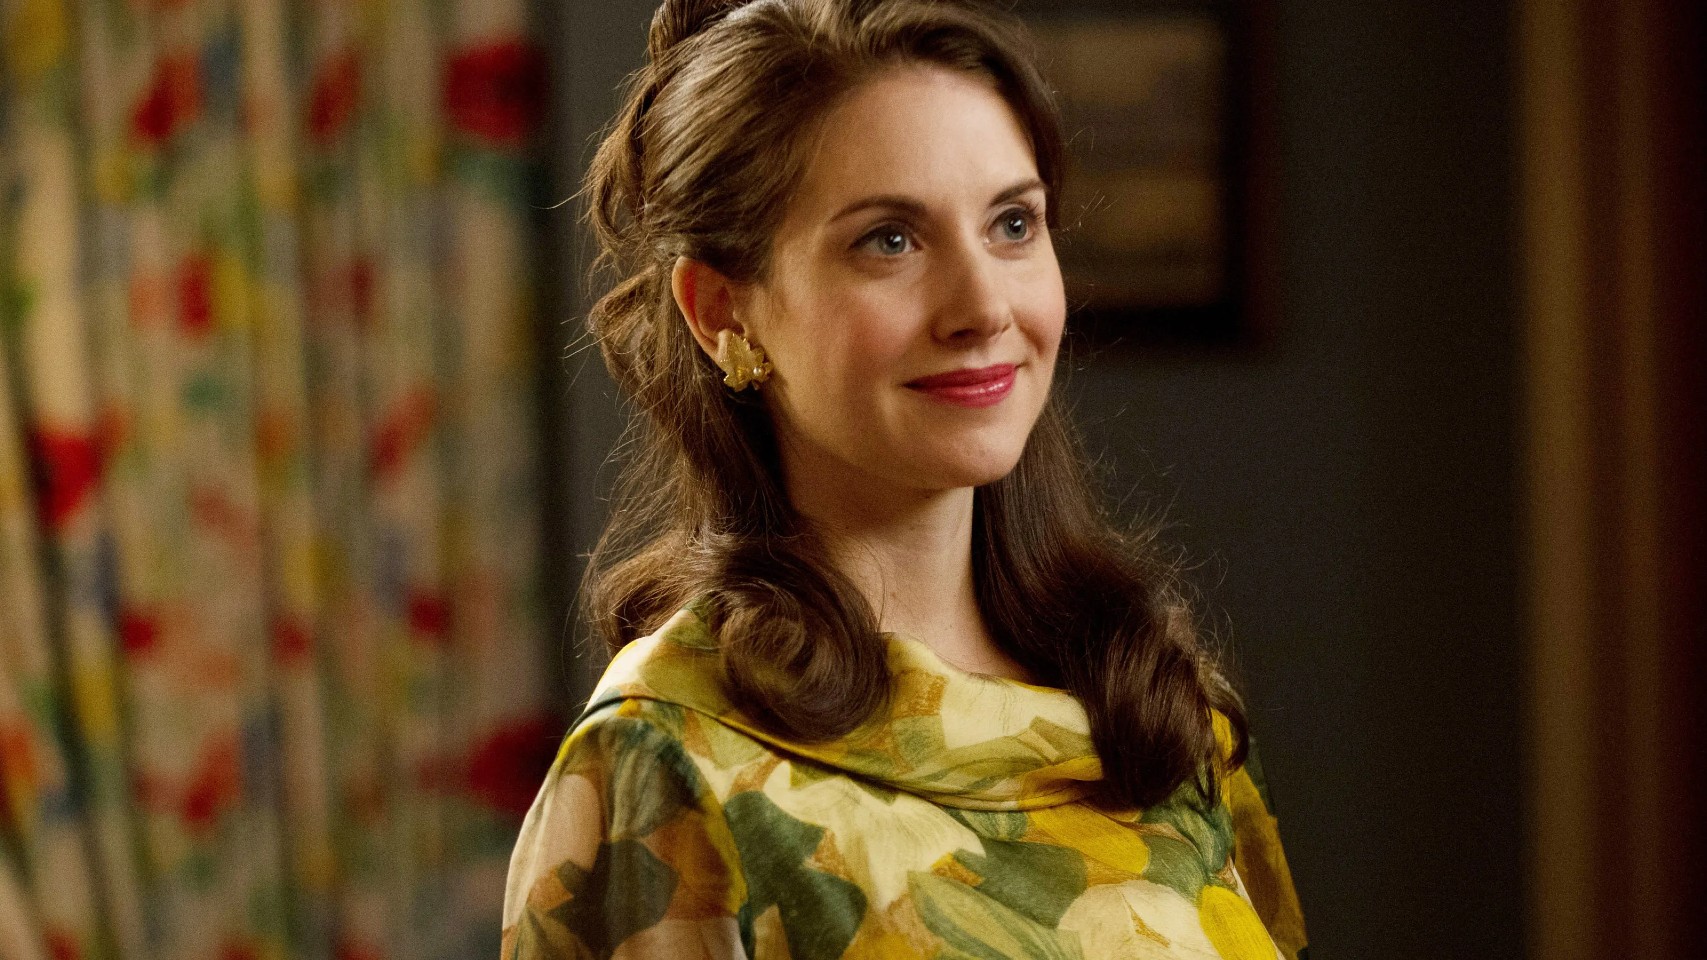 Watch Alison Brie Go Streaking Totally Naked In A Hotel